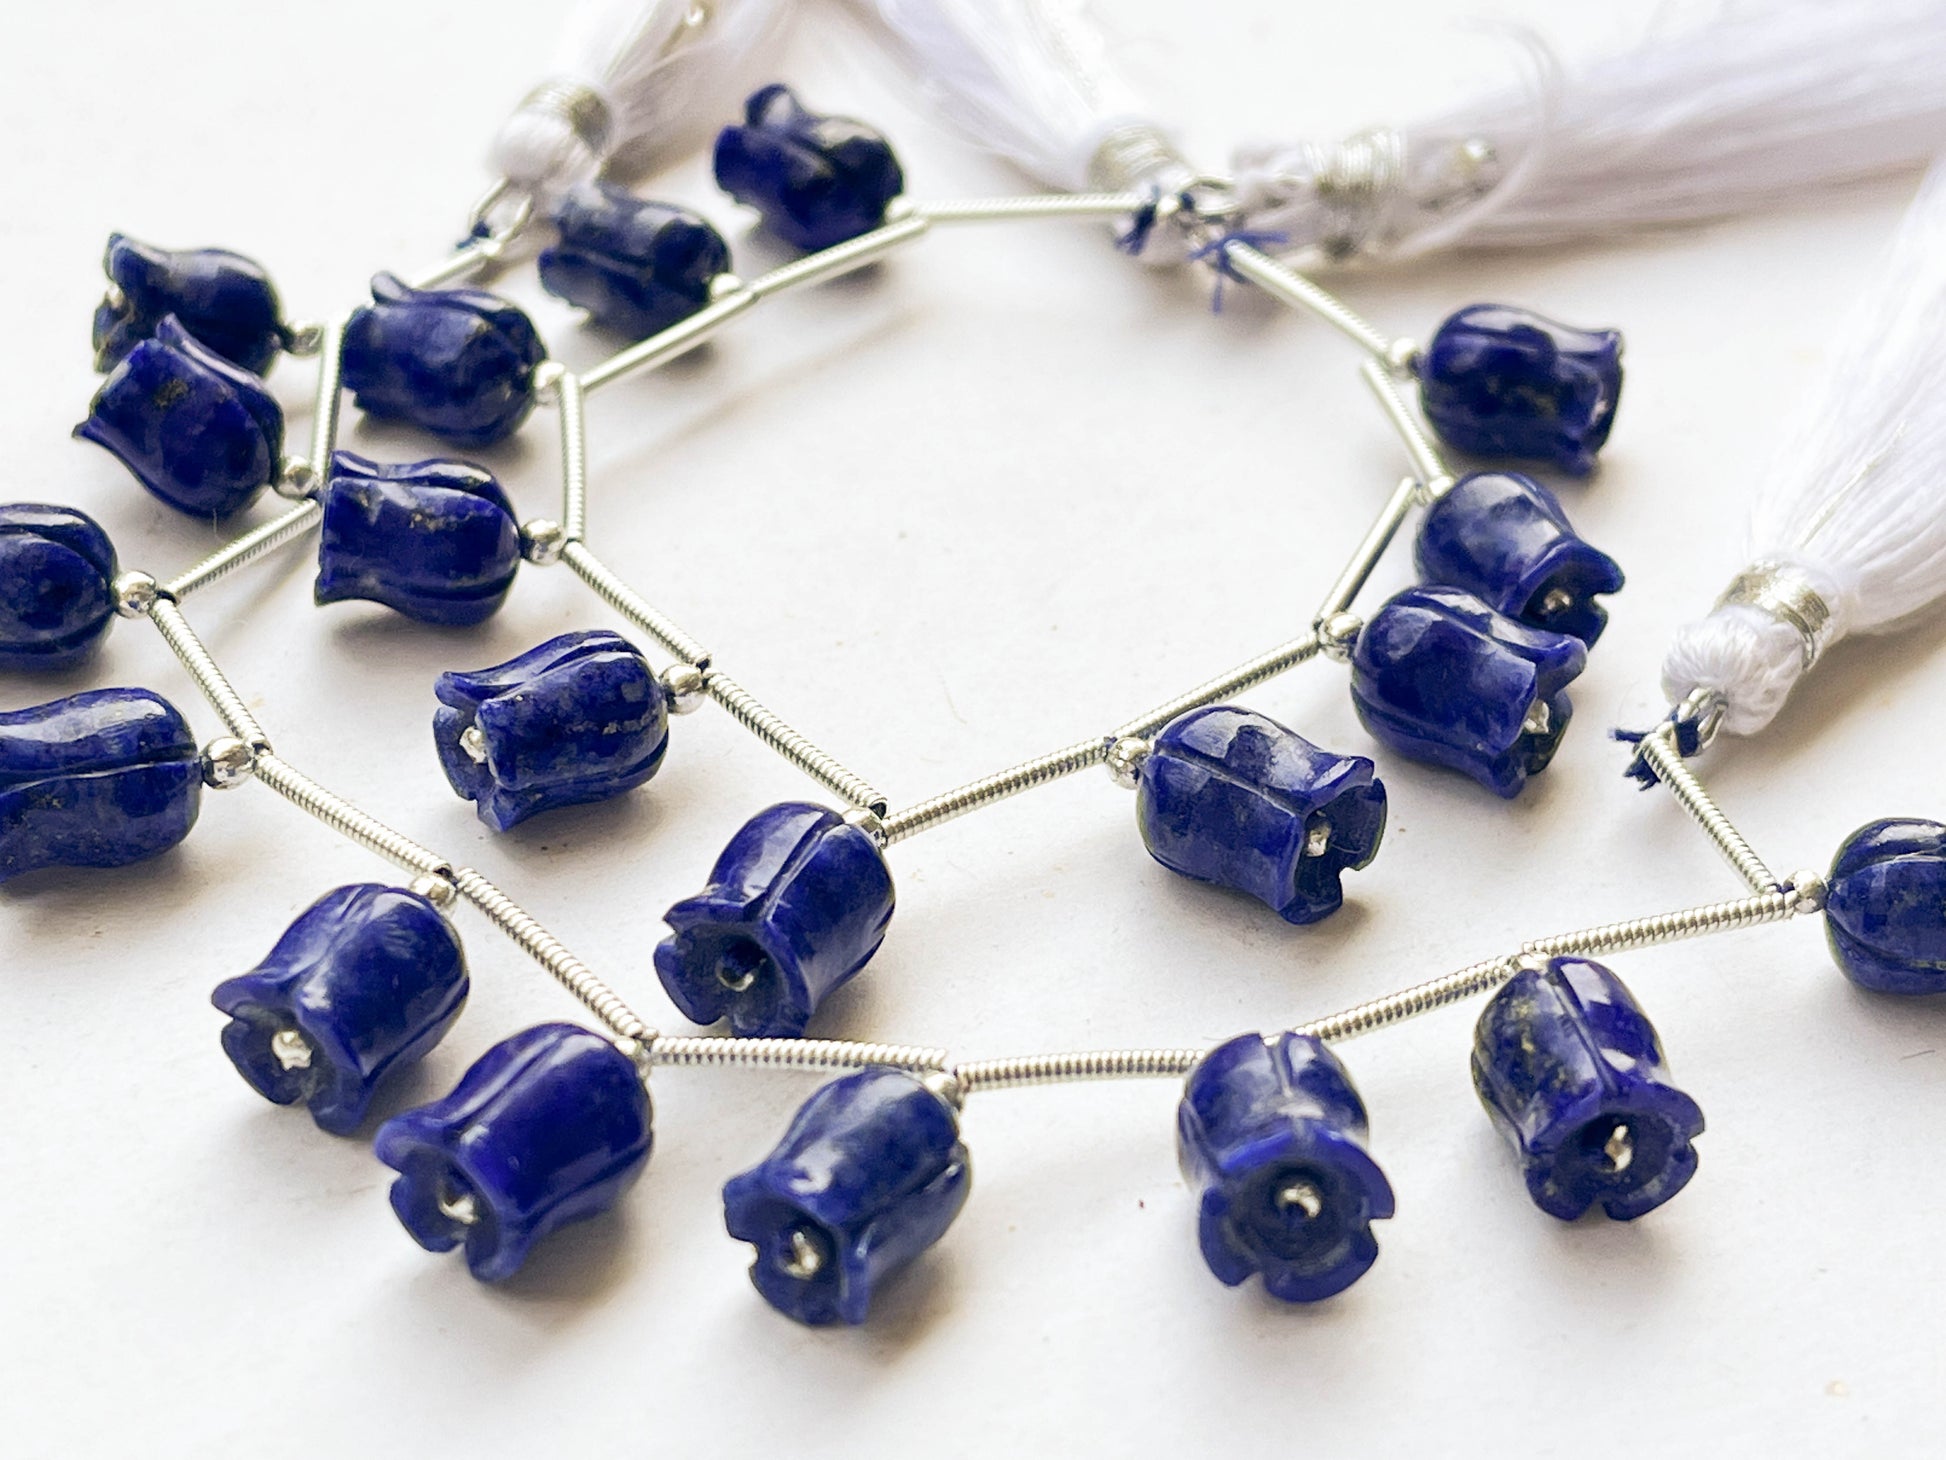 Lapis Lazuli flower carving Lily of the valley shape beads Beadsforyourjewelry